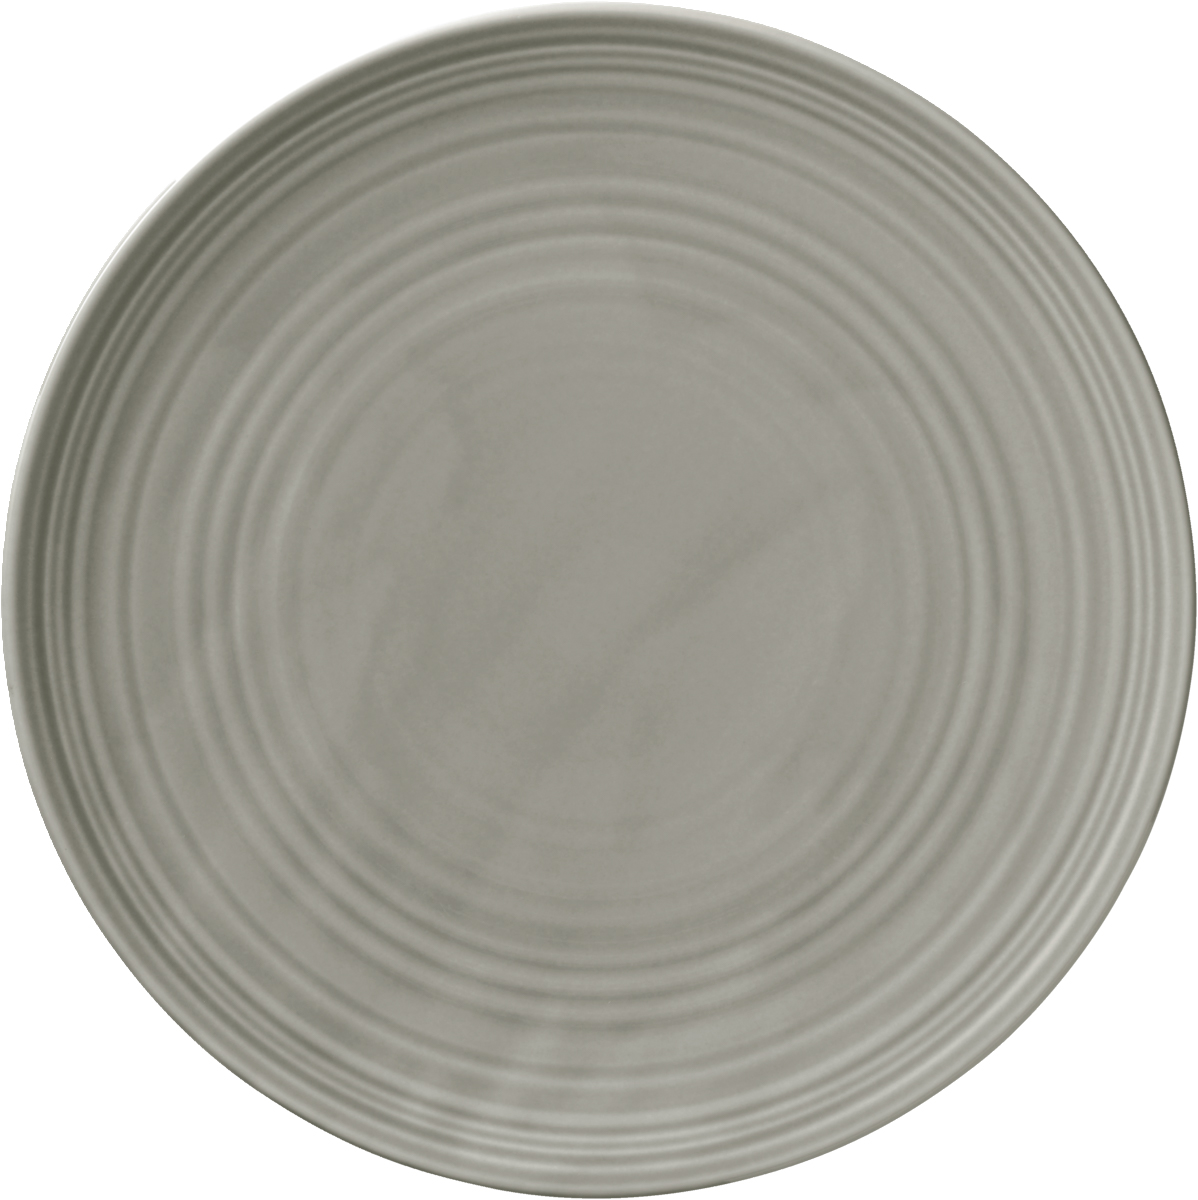 Teller flach rund coup 28cm COUNTRY HOUSE GRAY